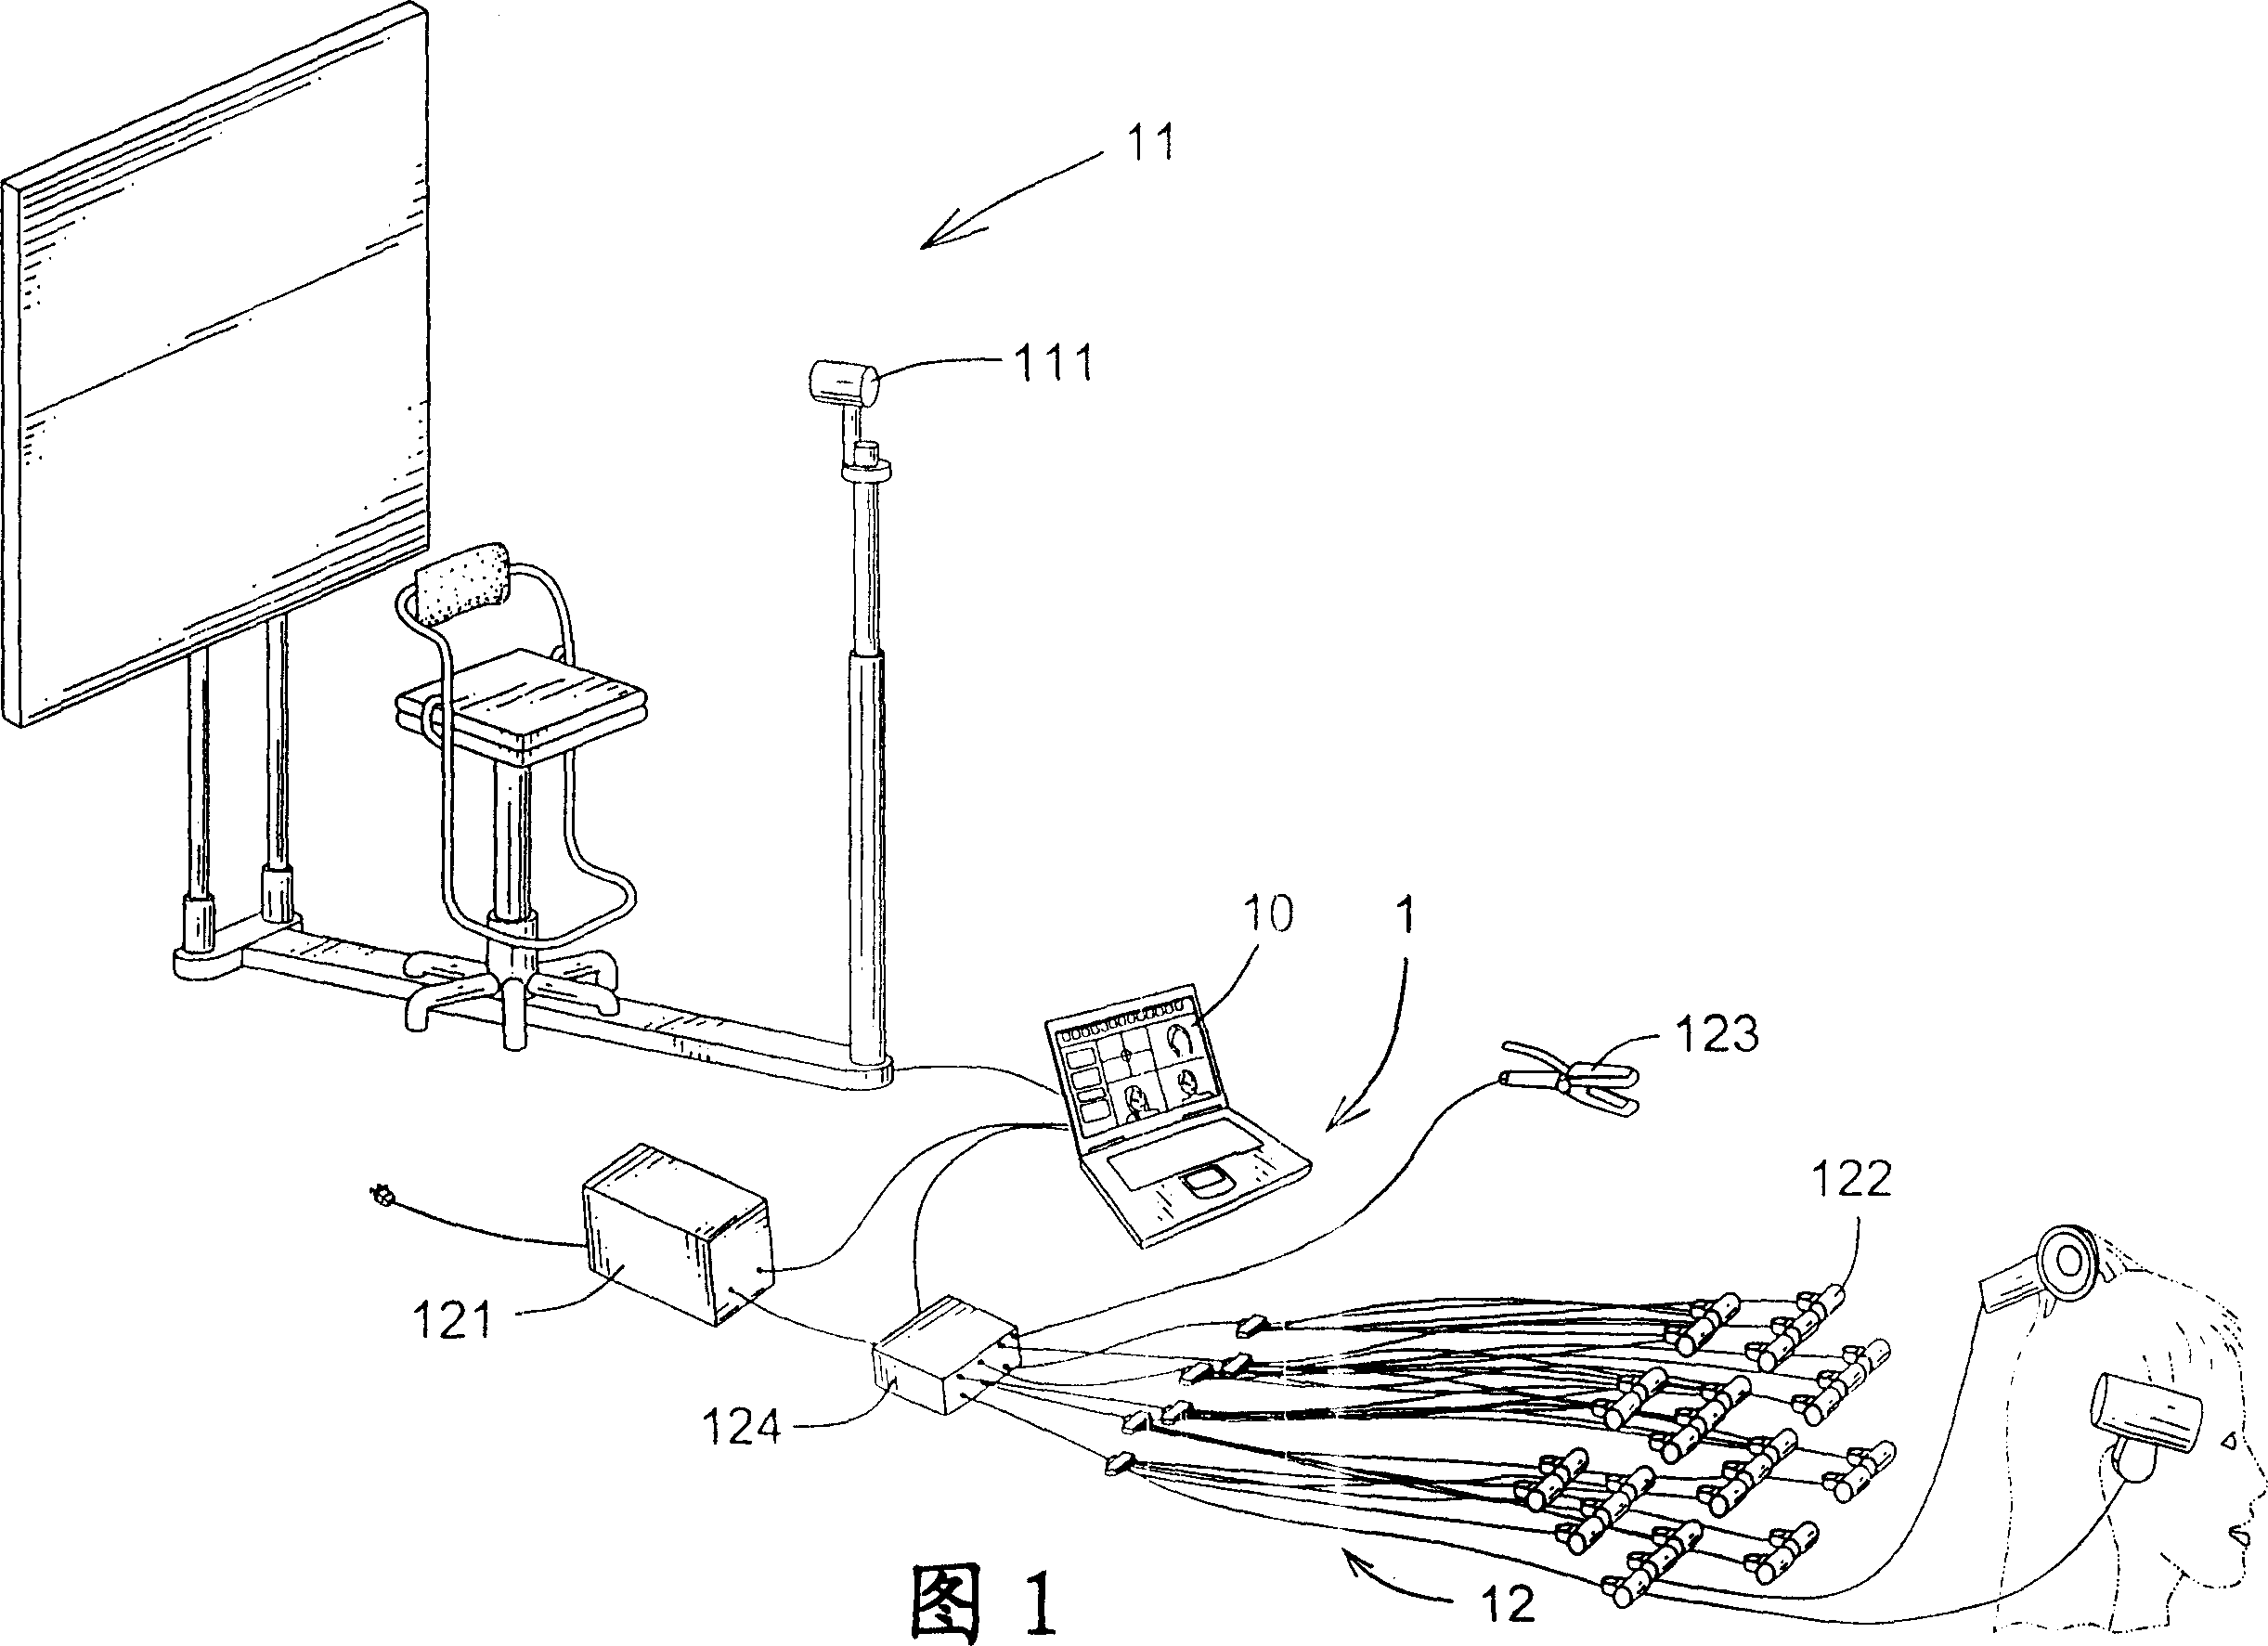 Hair-style virtual design method and apparatus generated by computer software